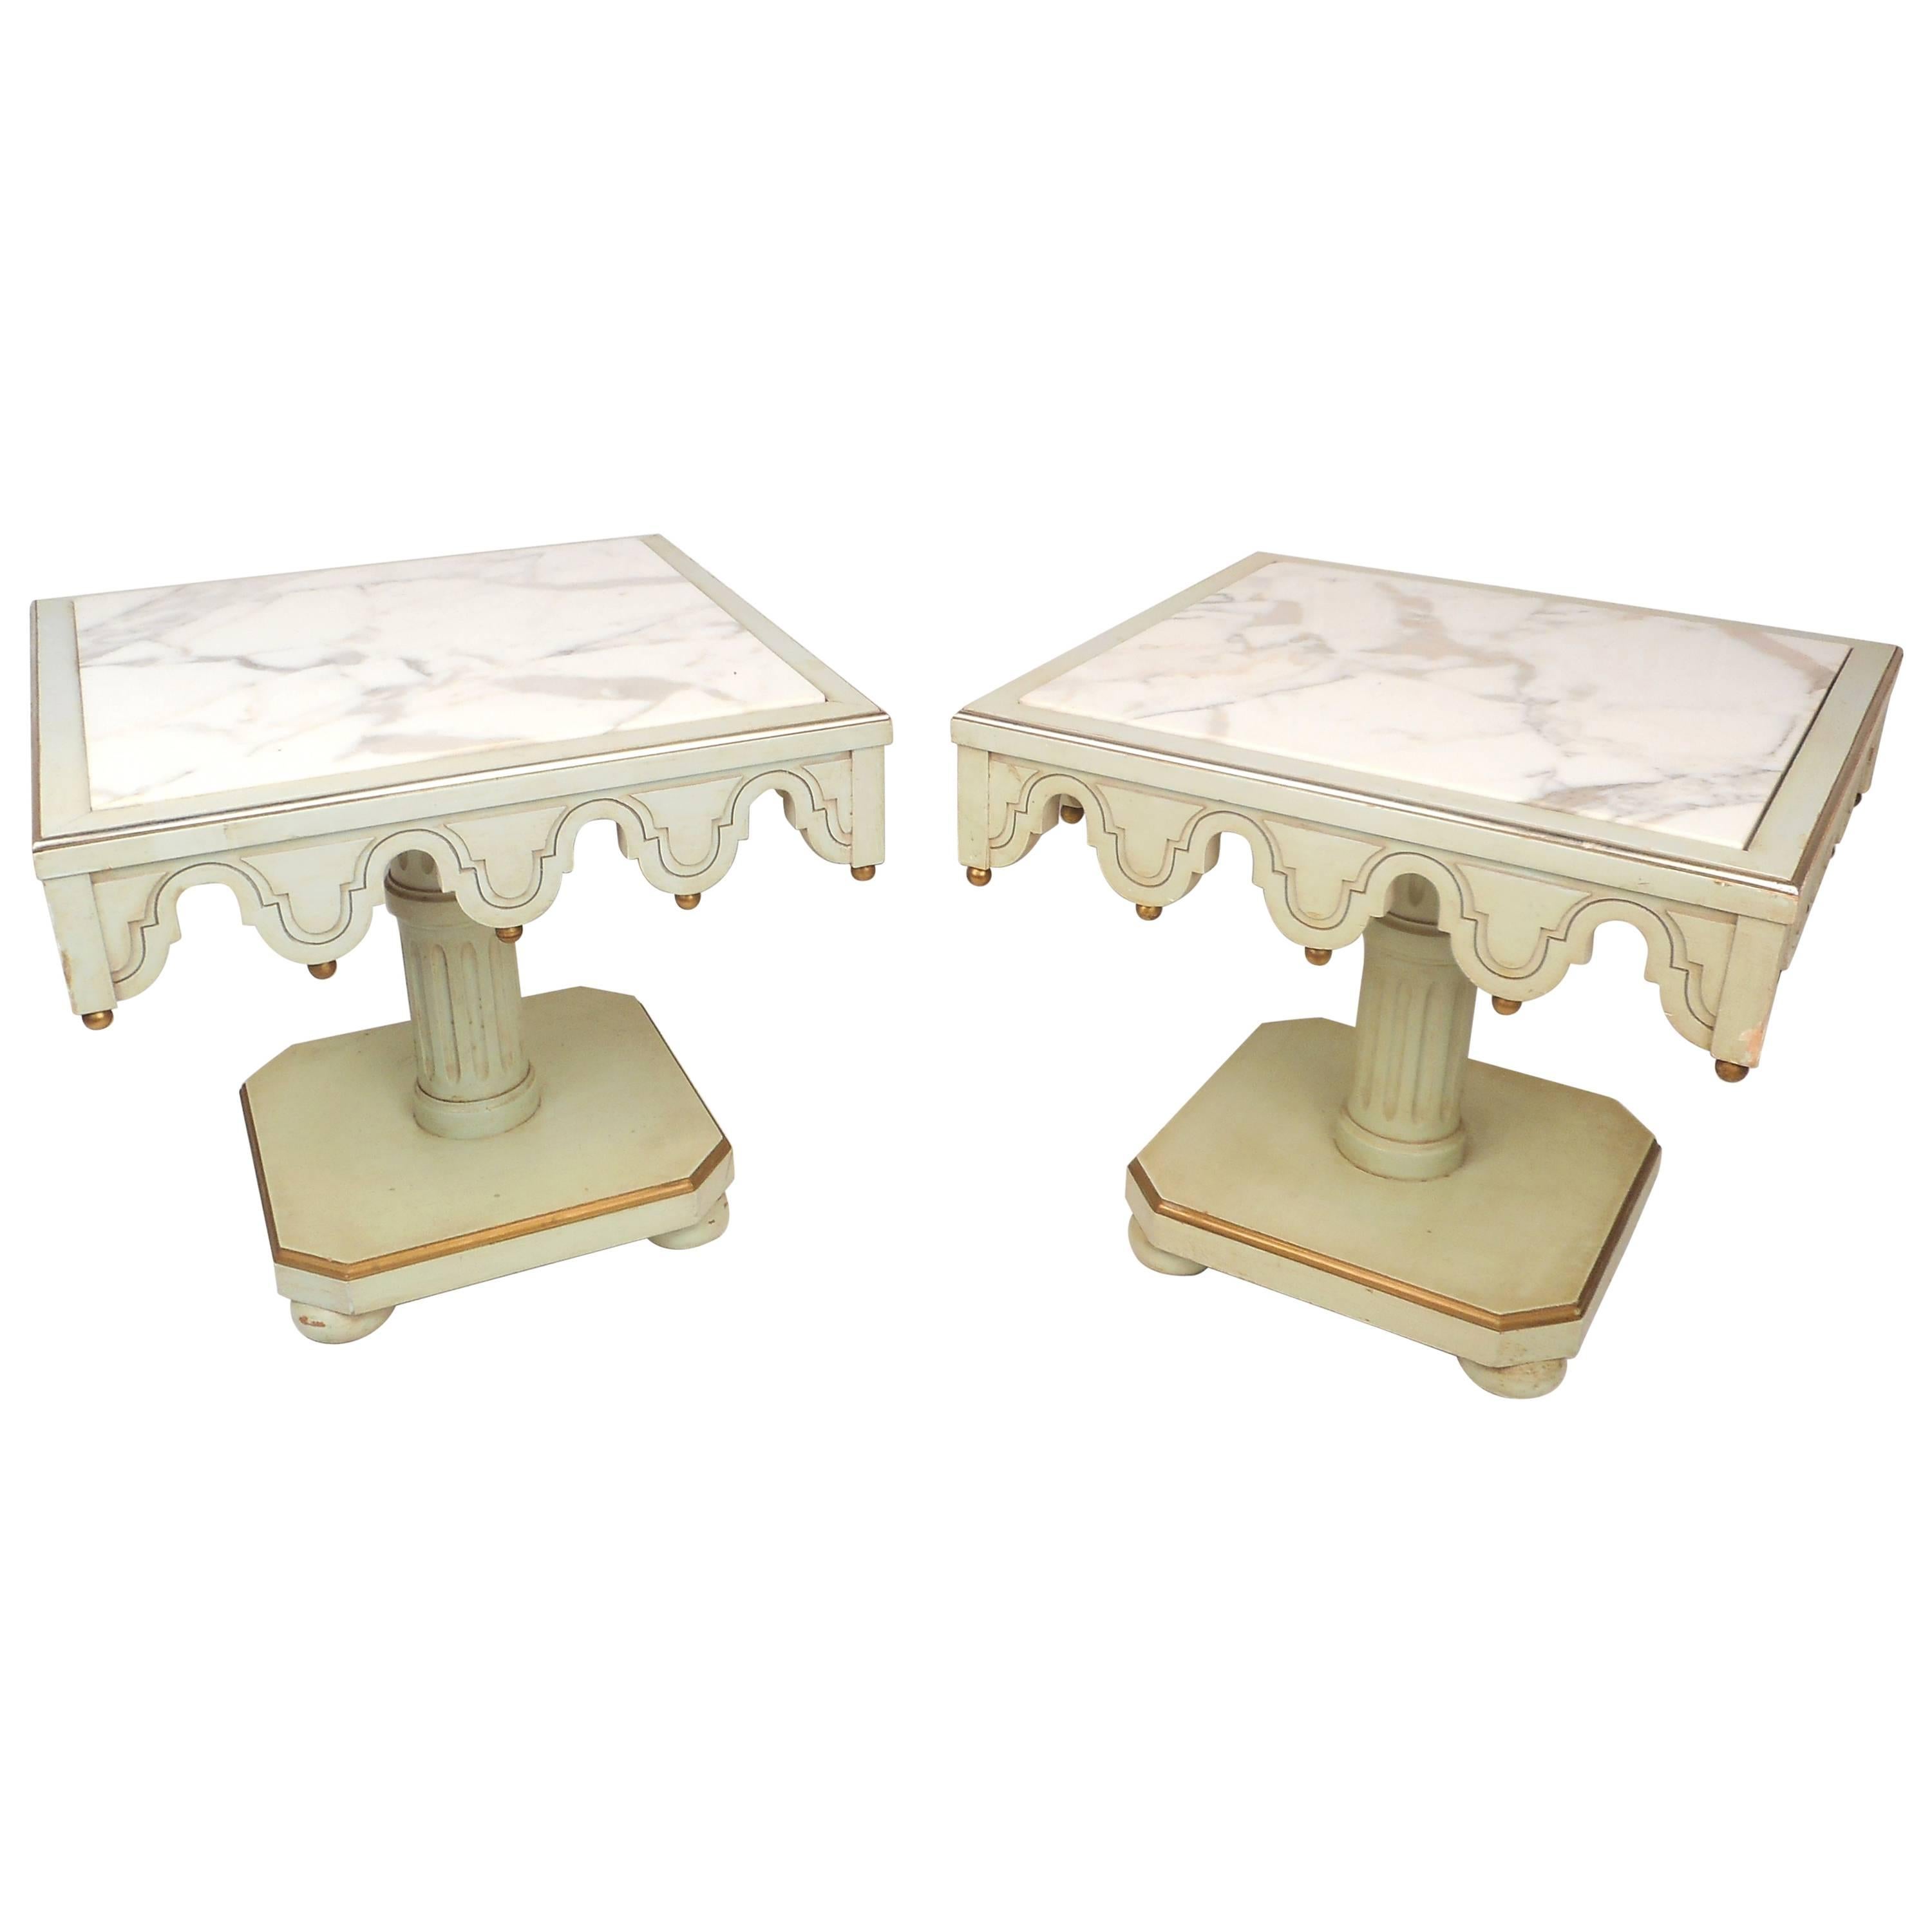 Pair of Mid-Century Marble-Top Side Tables in the Style of Dorothy Draper